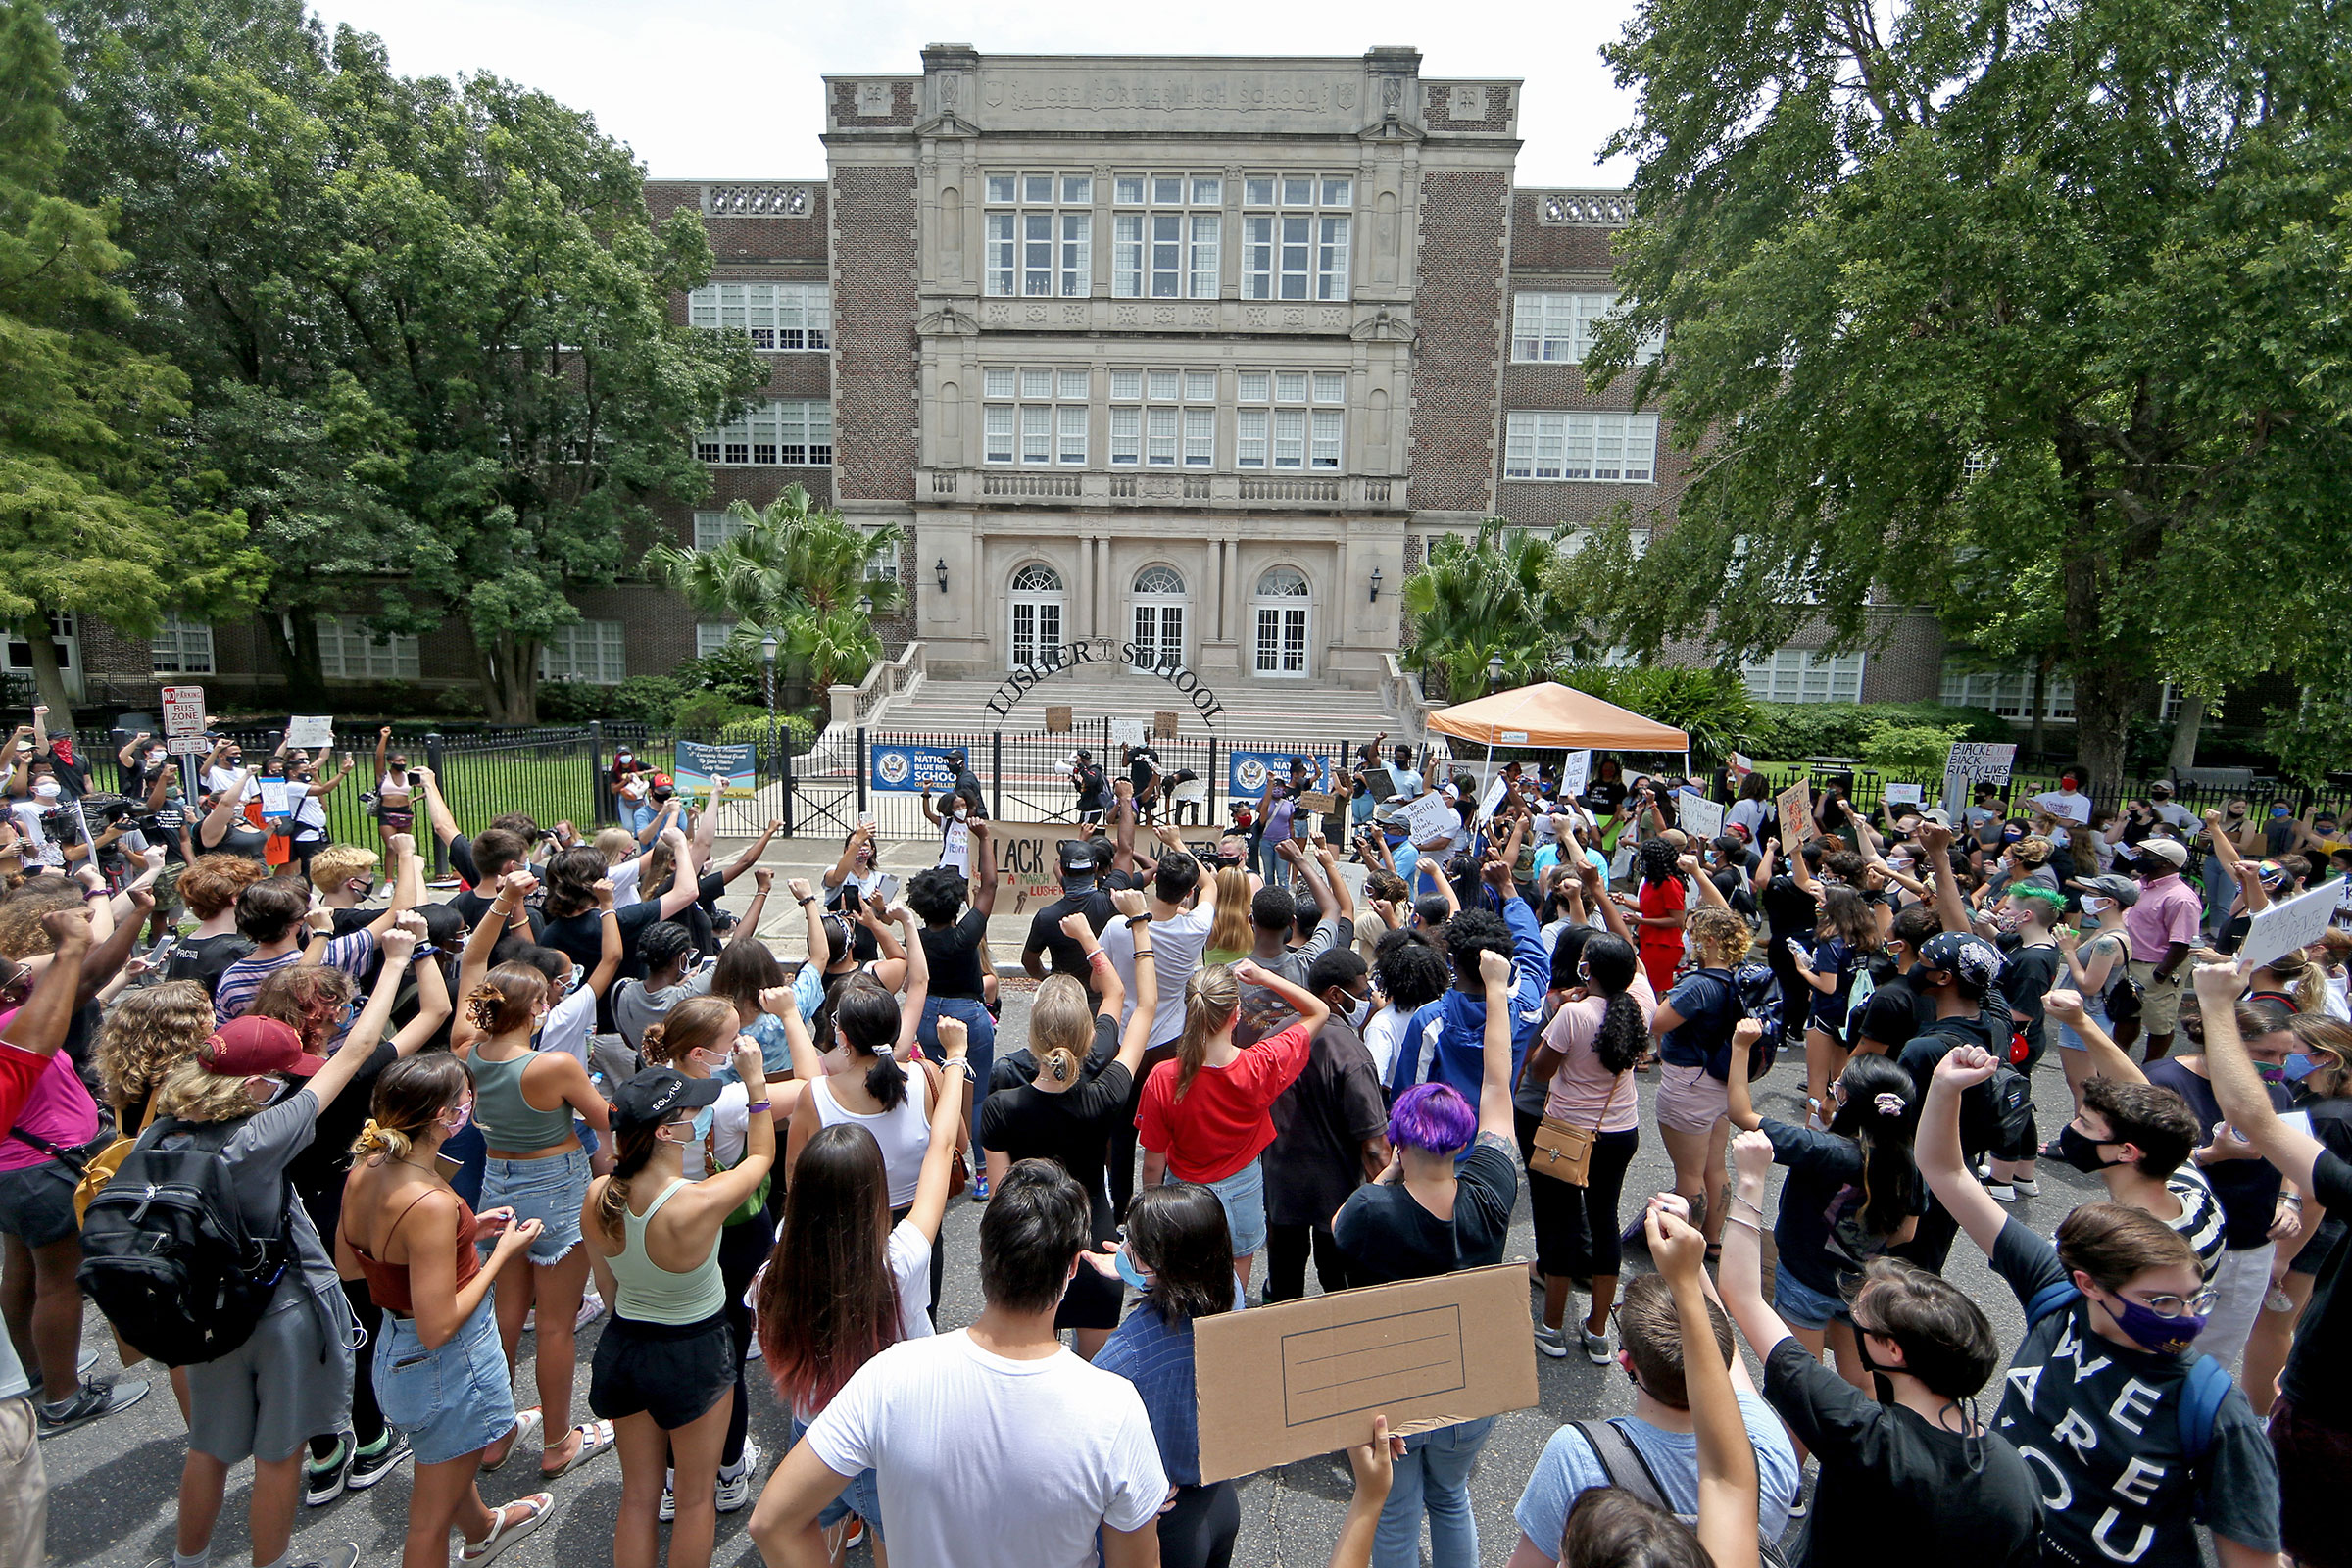 People rally outside the Lusher Charter School—named for  Confederate segregationist Robert Mills Lusher—in New Orleans on July 4, 2020, to demand the school be renamed. (Michael DeMocker—Getty Images)